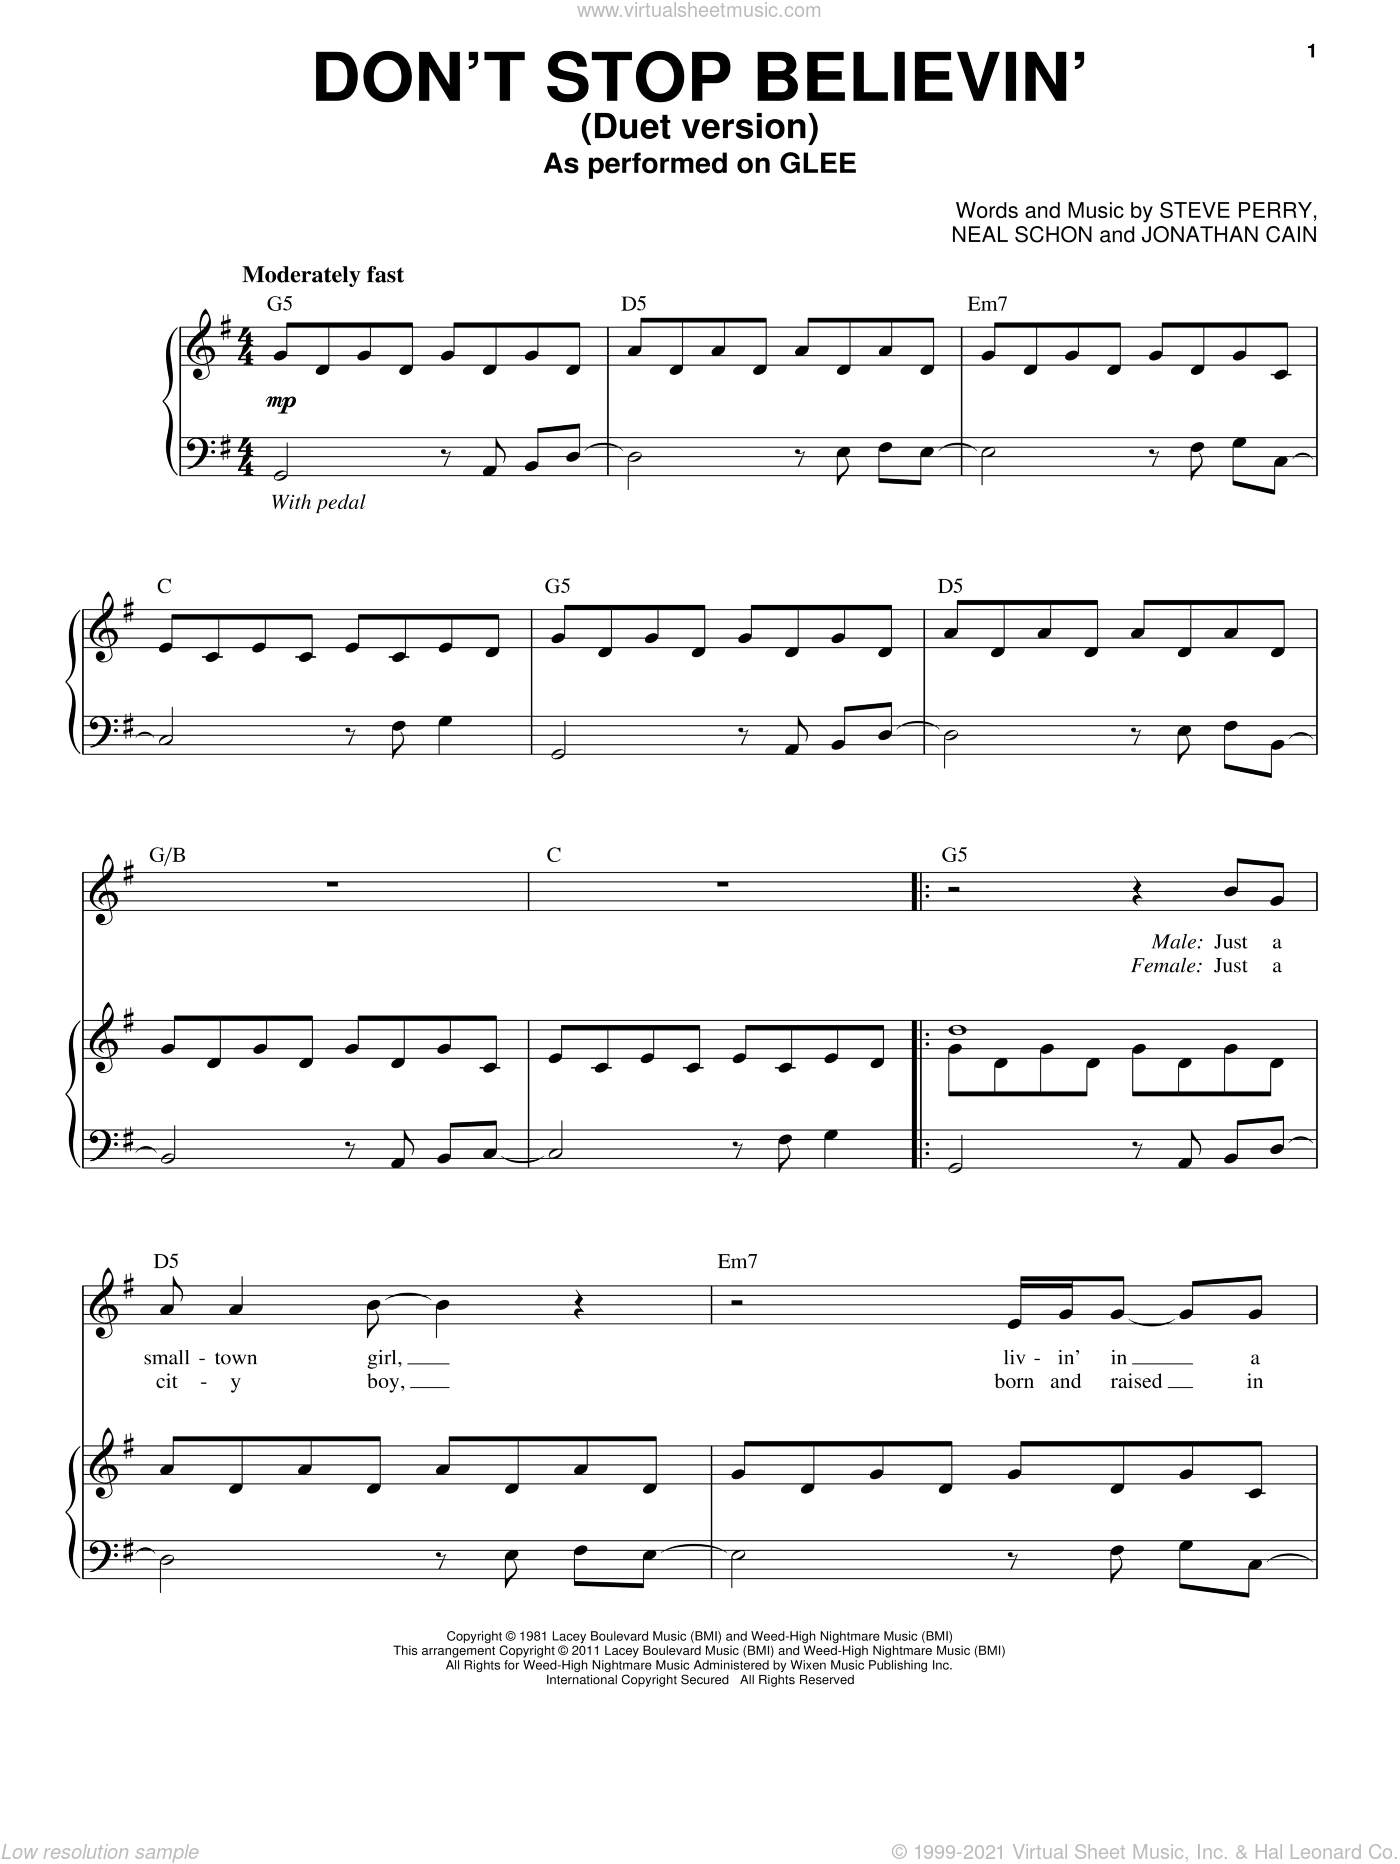 Skalk carro cuscús Don't Stop Believin' (Vocal Duet) sheet music for voice and piano v2